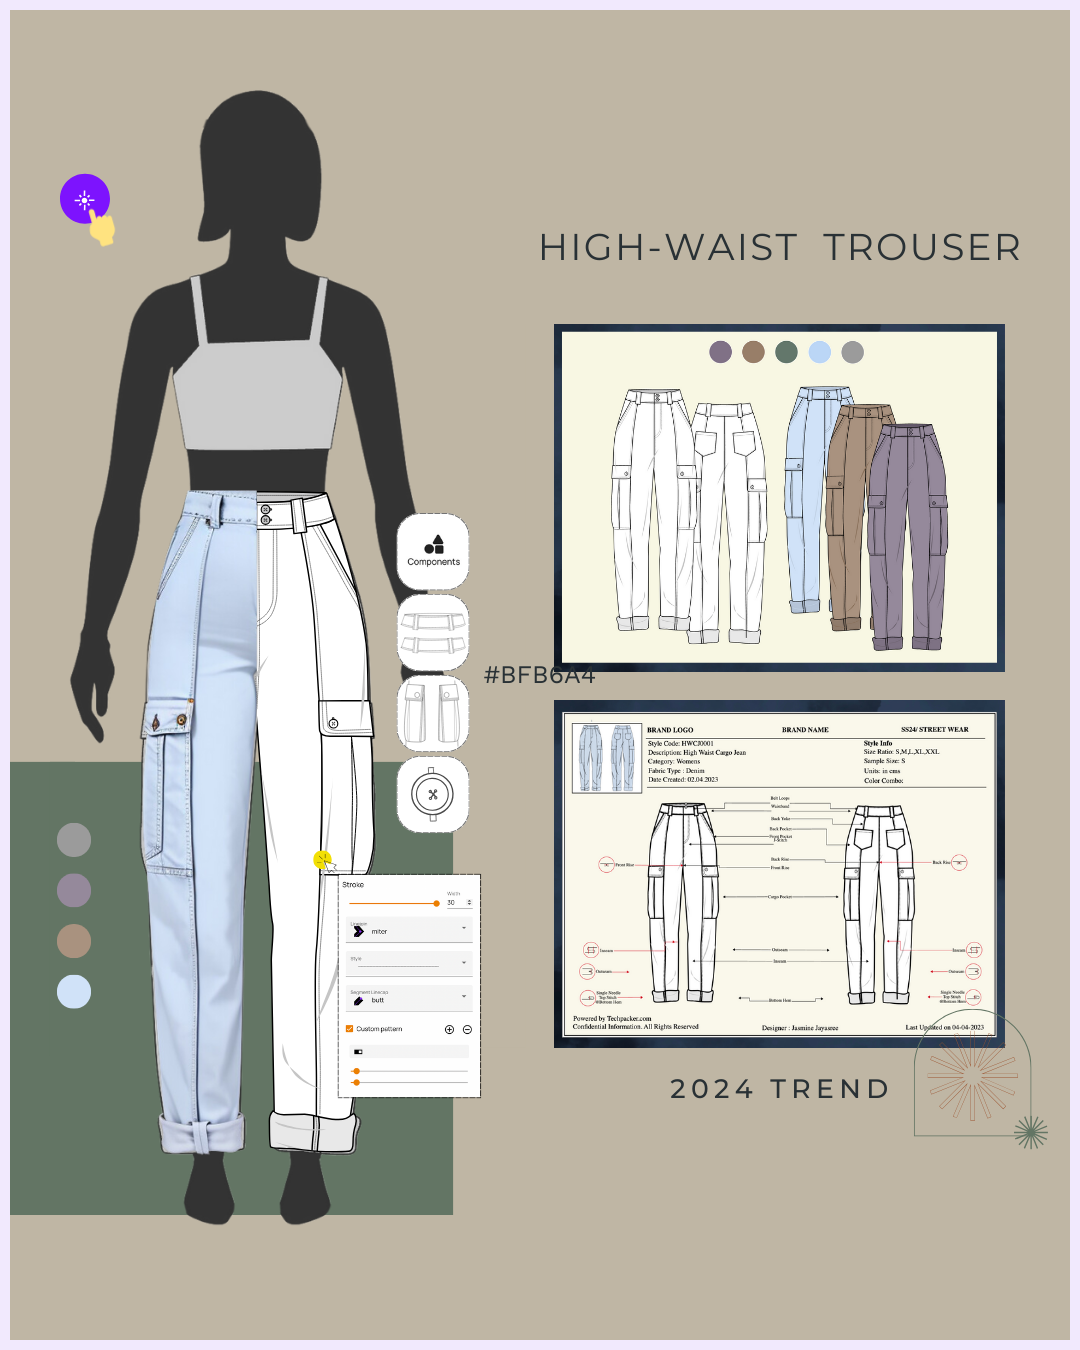 Top 10 High-waist Trouser Sketches and Templates